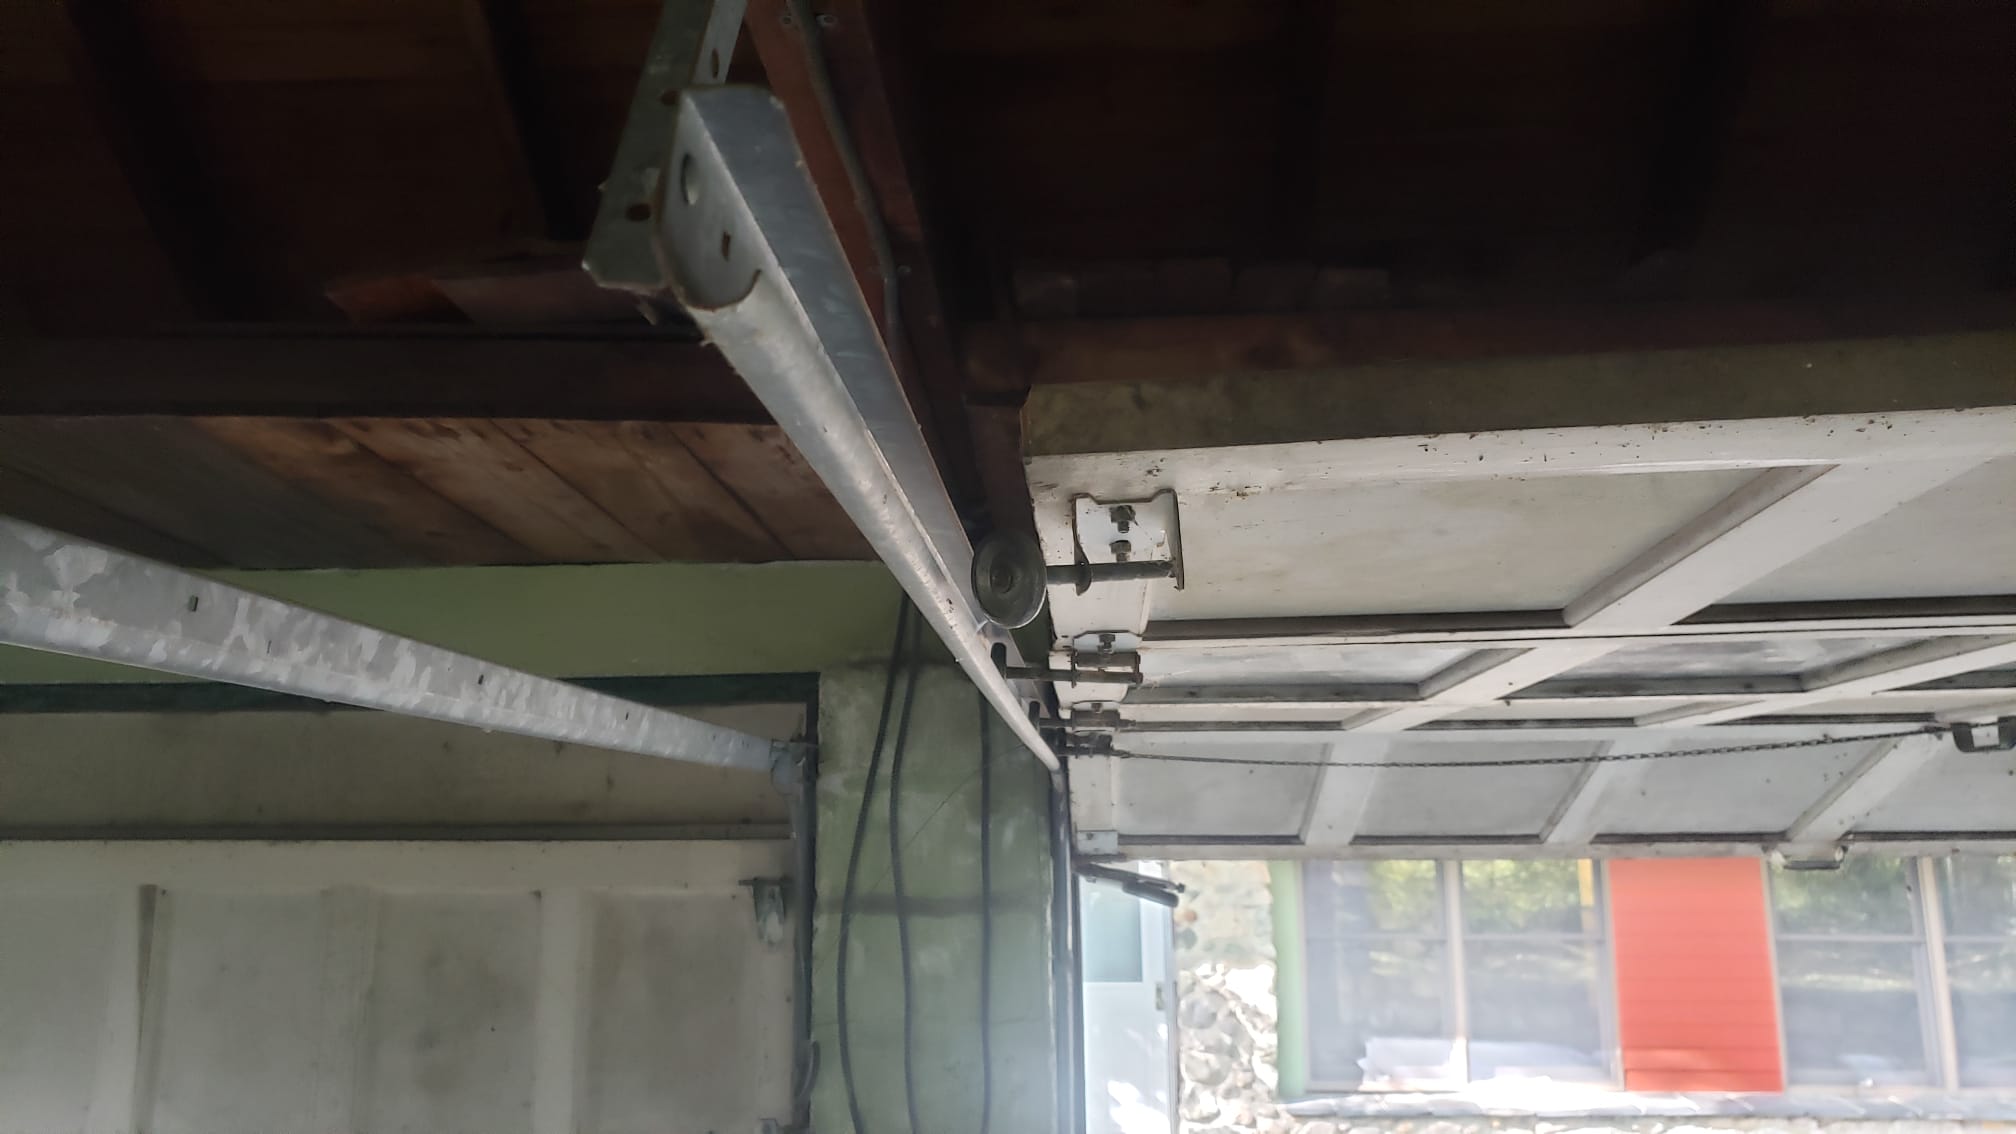 Garage Door Rails: The Importance of Staying on the Same Tracks